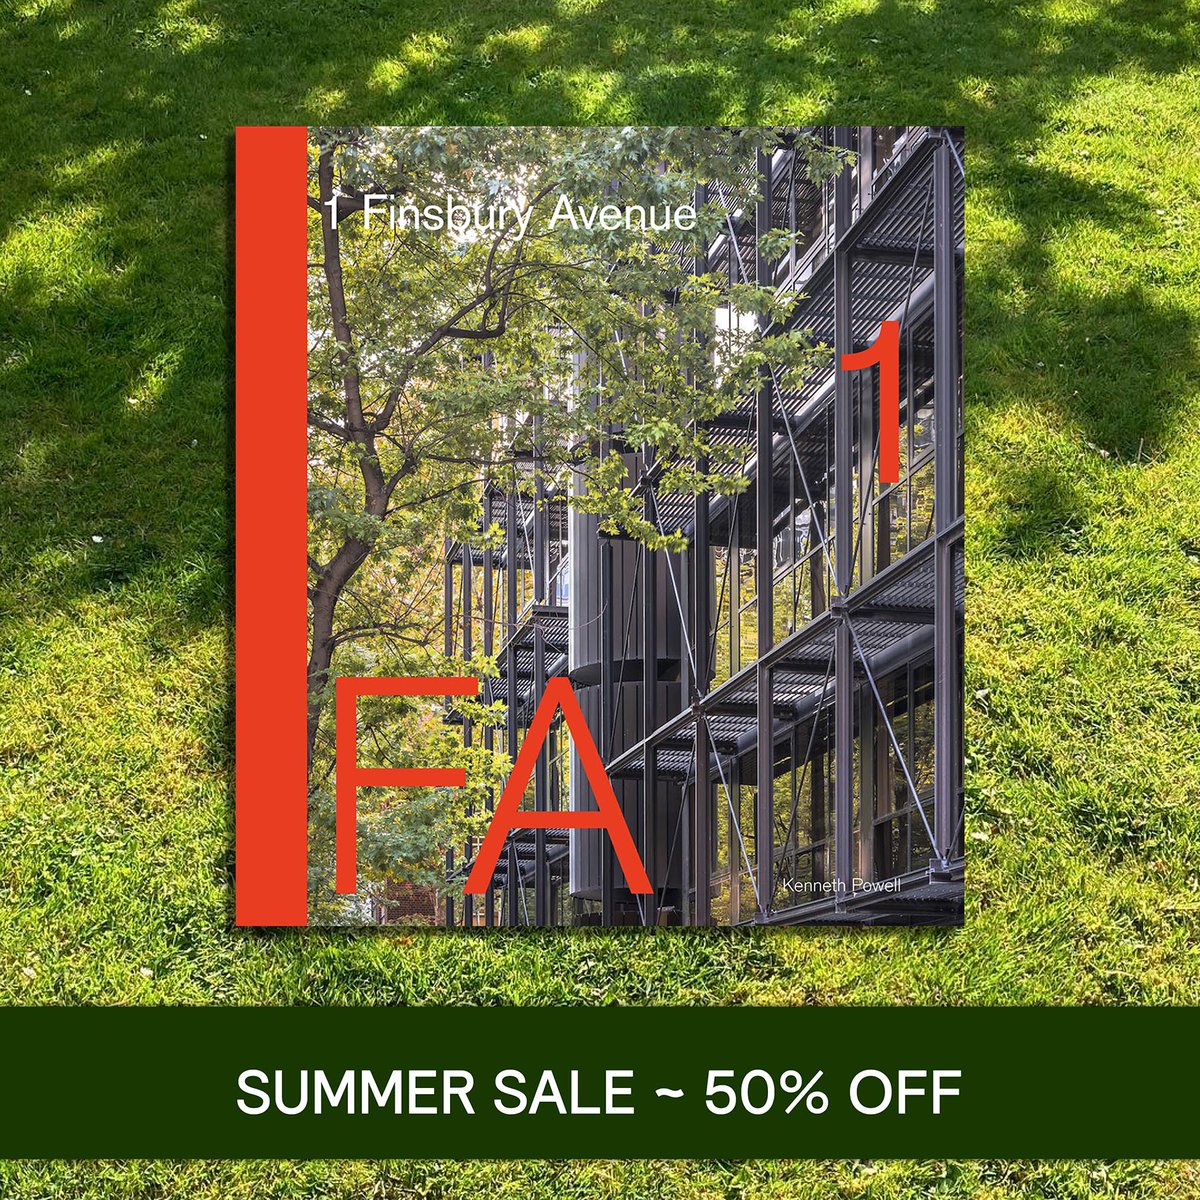 More books with 50% off! 
Browse the #architecturebooks that are included in the Lund Humphries Summer Sale - only until the end of August! Visit lundhumphries.com/collections/su…
#FinsburyAvenue #JapaneseArchitecture #SynagogueArchitecture #EricMendelsohnArchitect #TheatreArchitecture